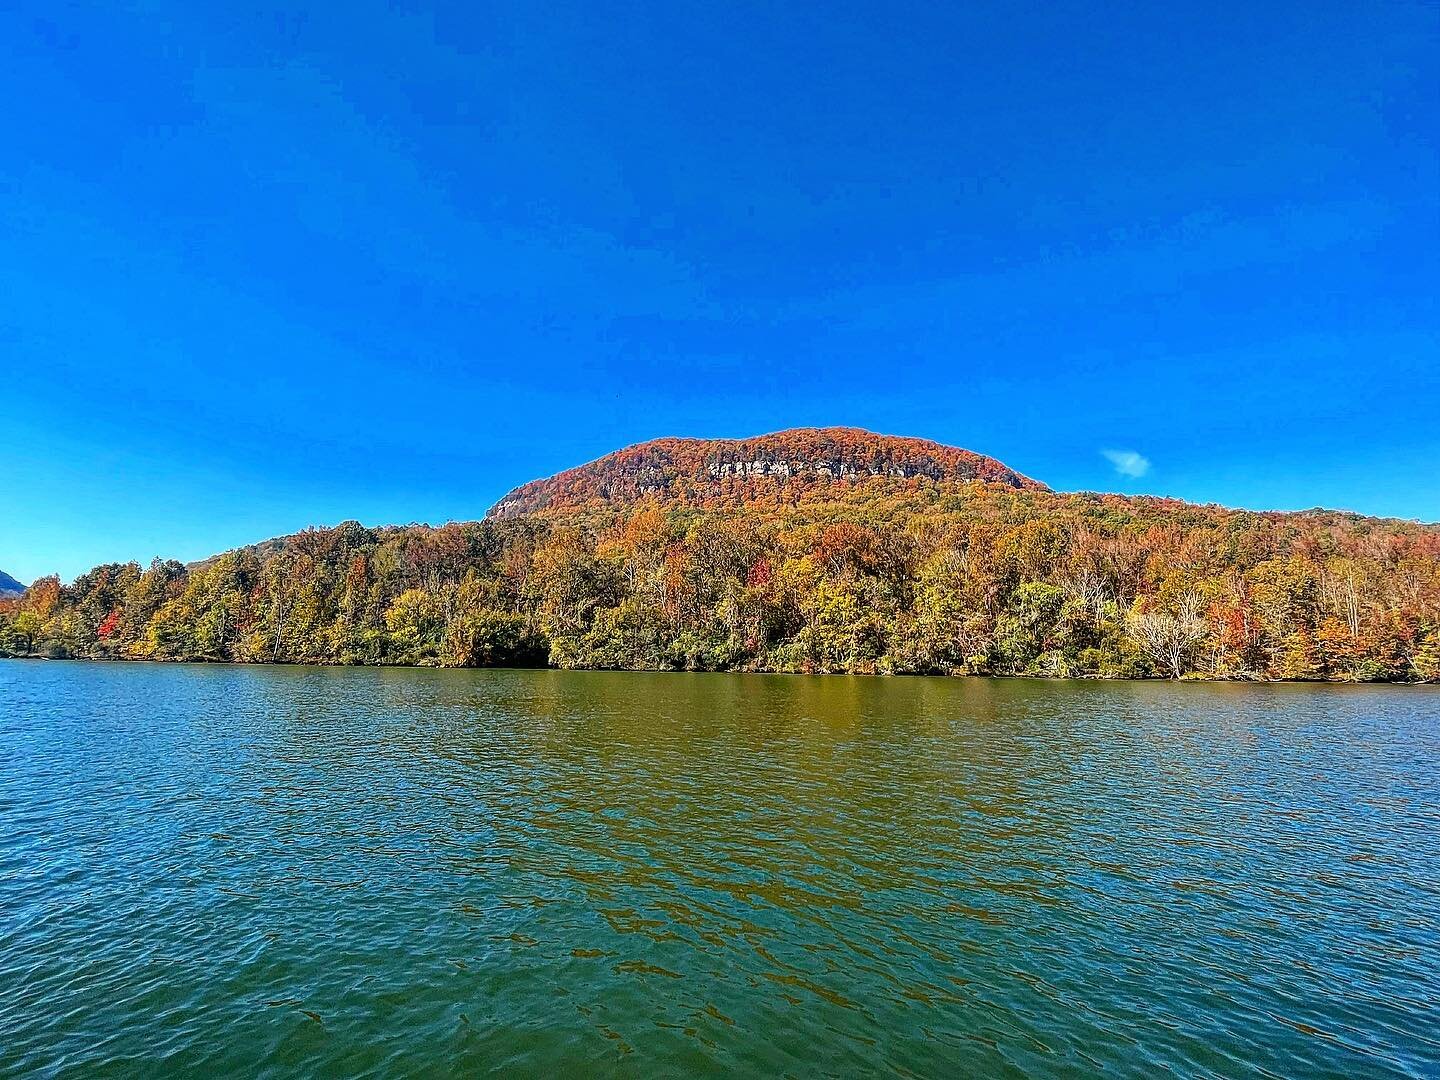 Only a couple more weeks of the fall season left 🍁! Book your tour or rental to see the beautiful River Gorge before the leaves fall! 

#explorethegorge #fall #fallcolors #fallcruise #fallfoilage #fallvibes #fallleaves #chattanooga #thingstodo #boat